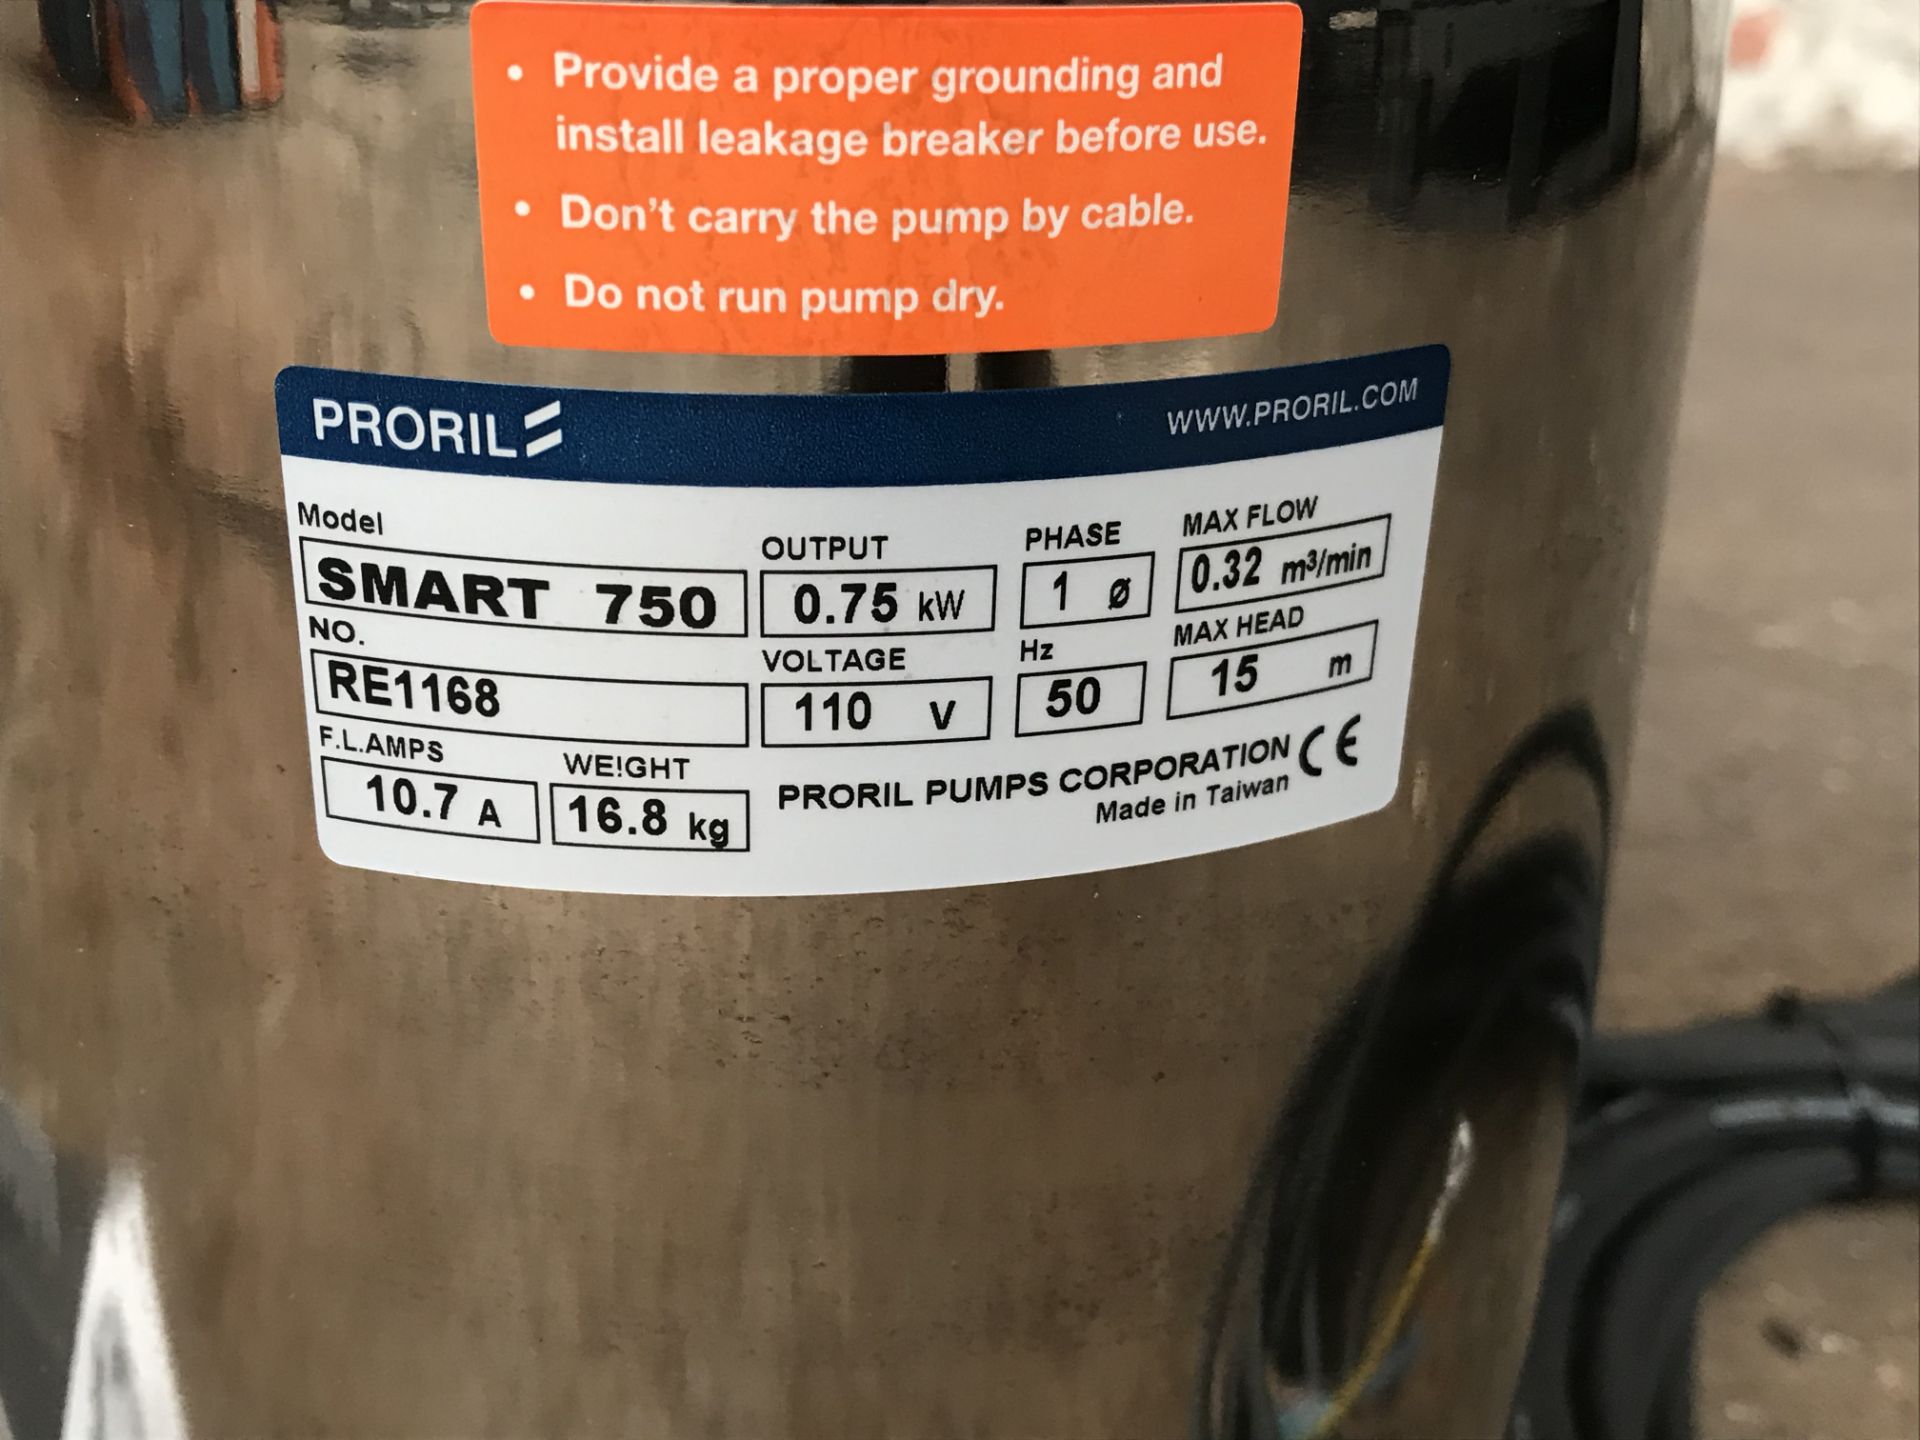 Unused Proril SMART 750 Submersible Drainer Pump | 110v | Ref: RE1168 - Image 7 of 7